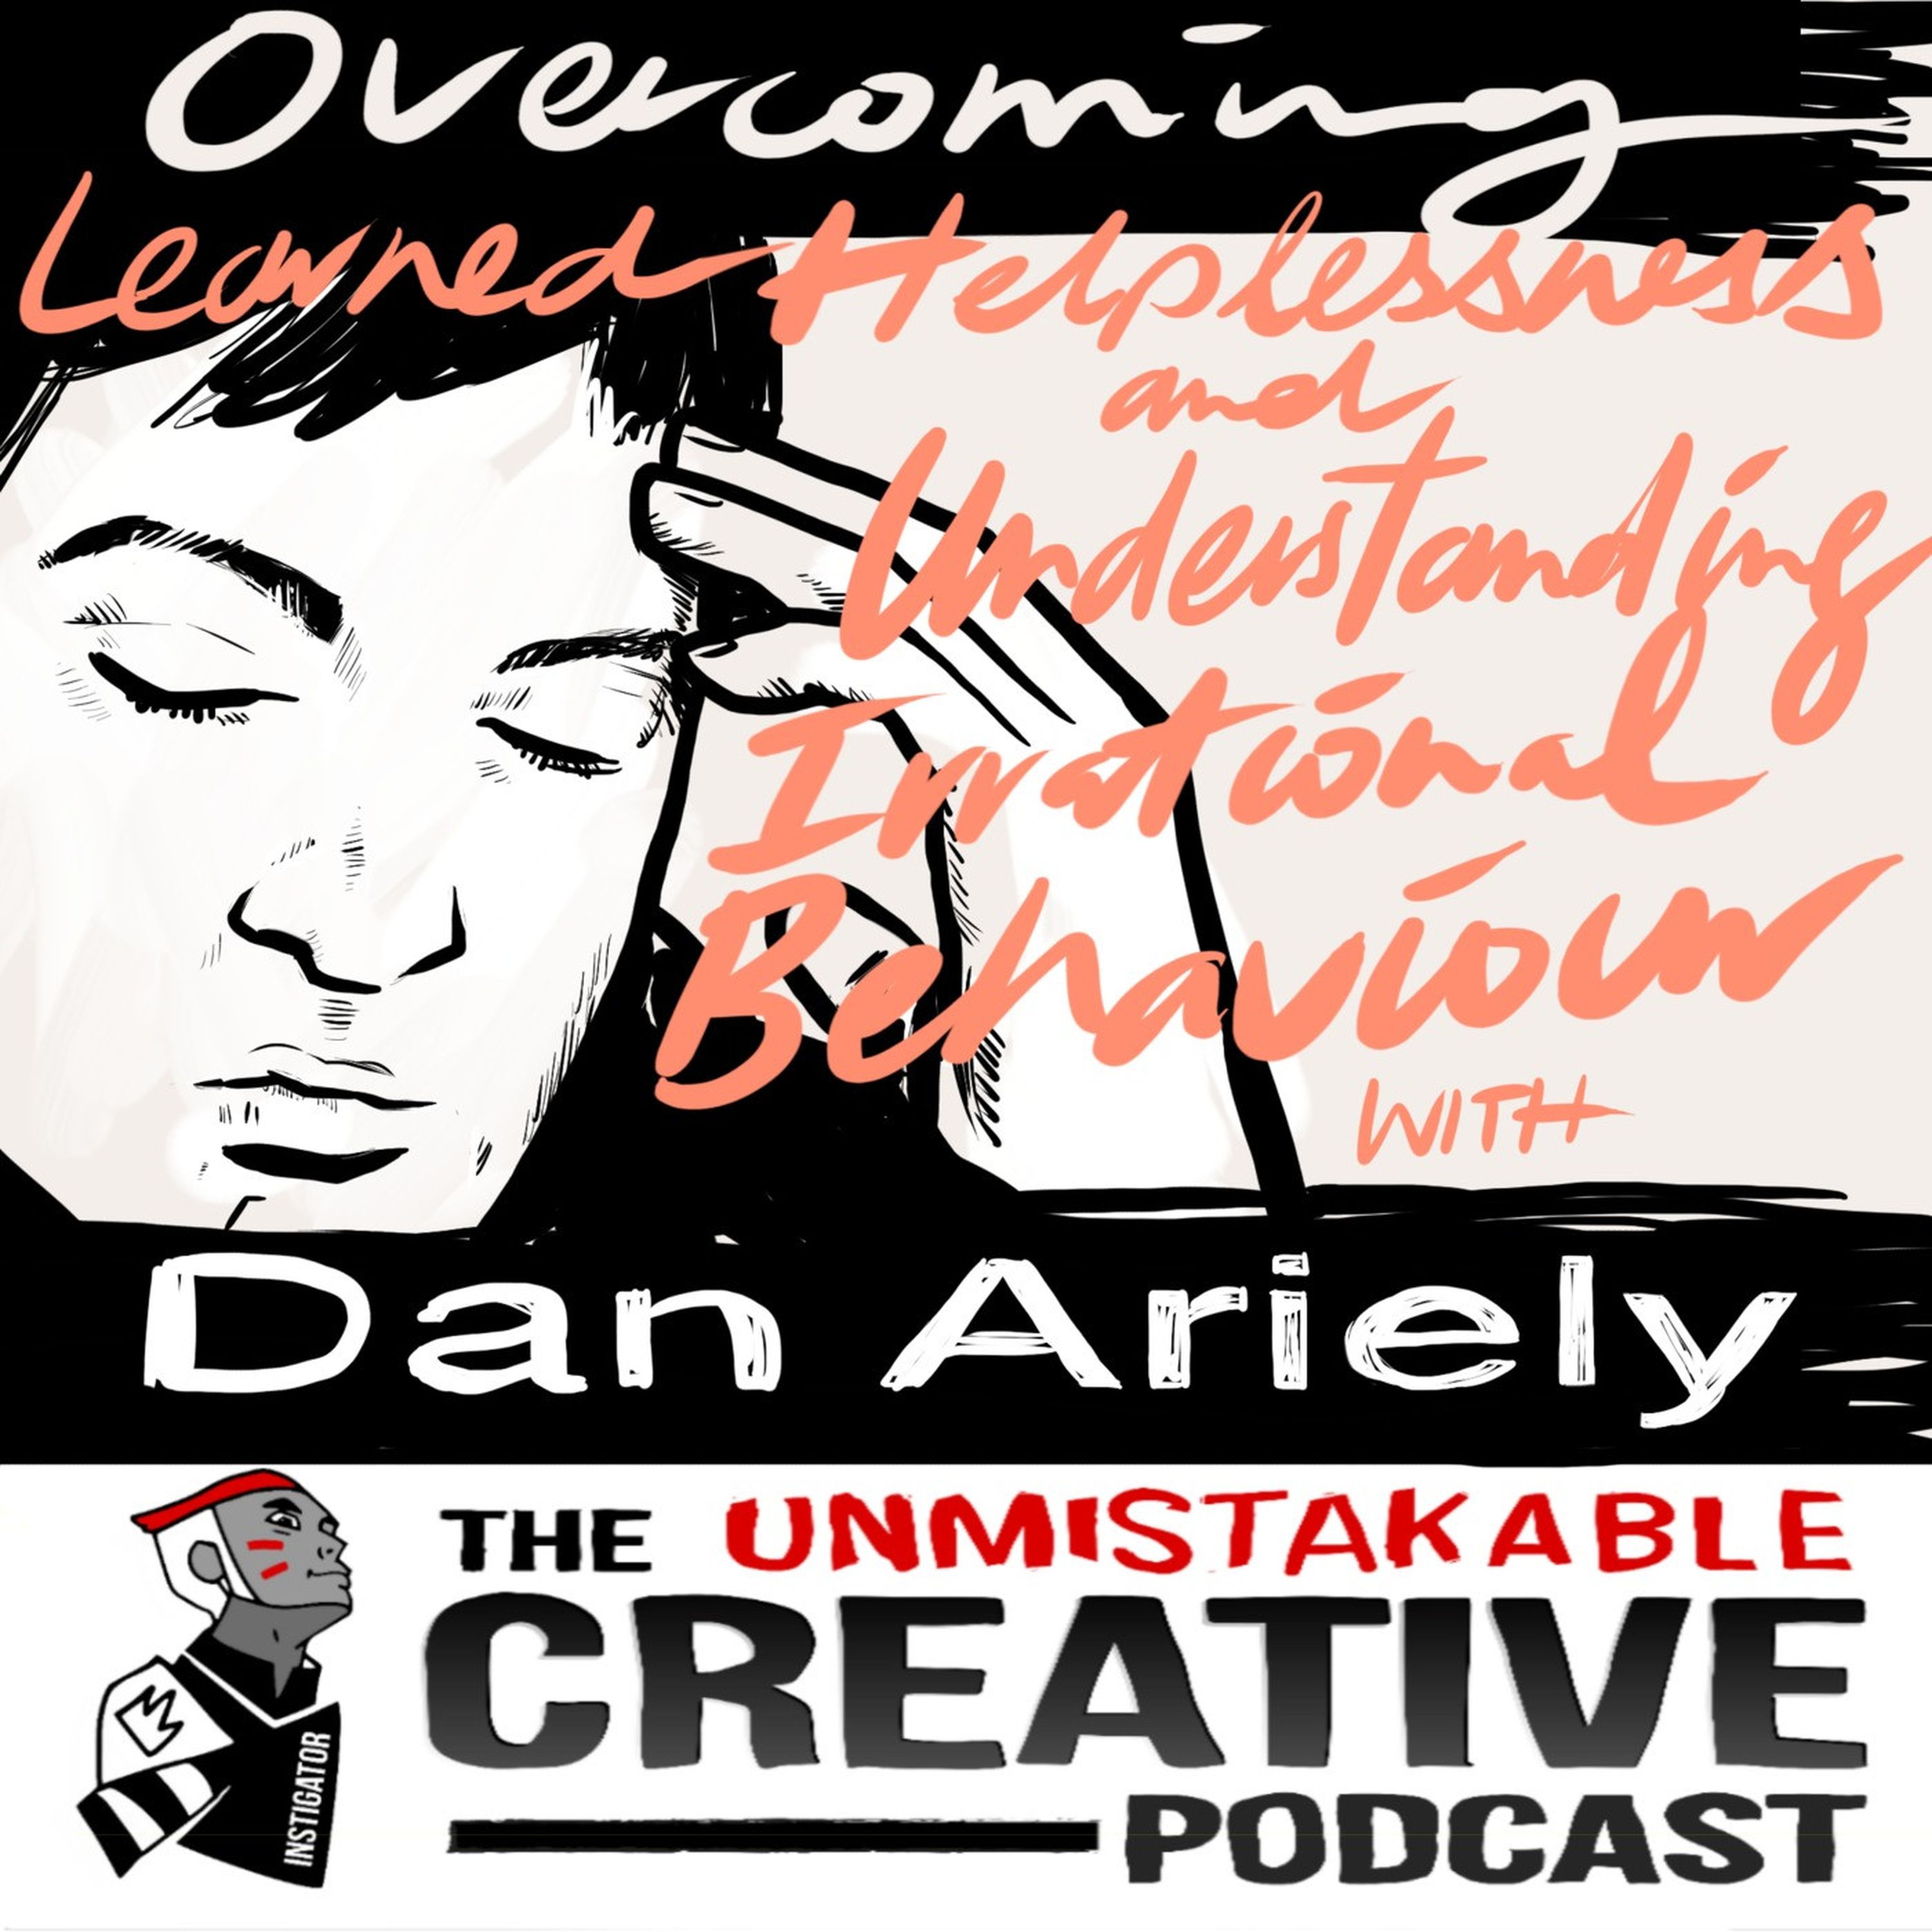 Overcoming Learned Helplessness and Understanding Irrational Behavior with Dan Ariely